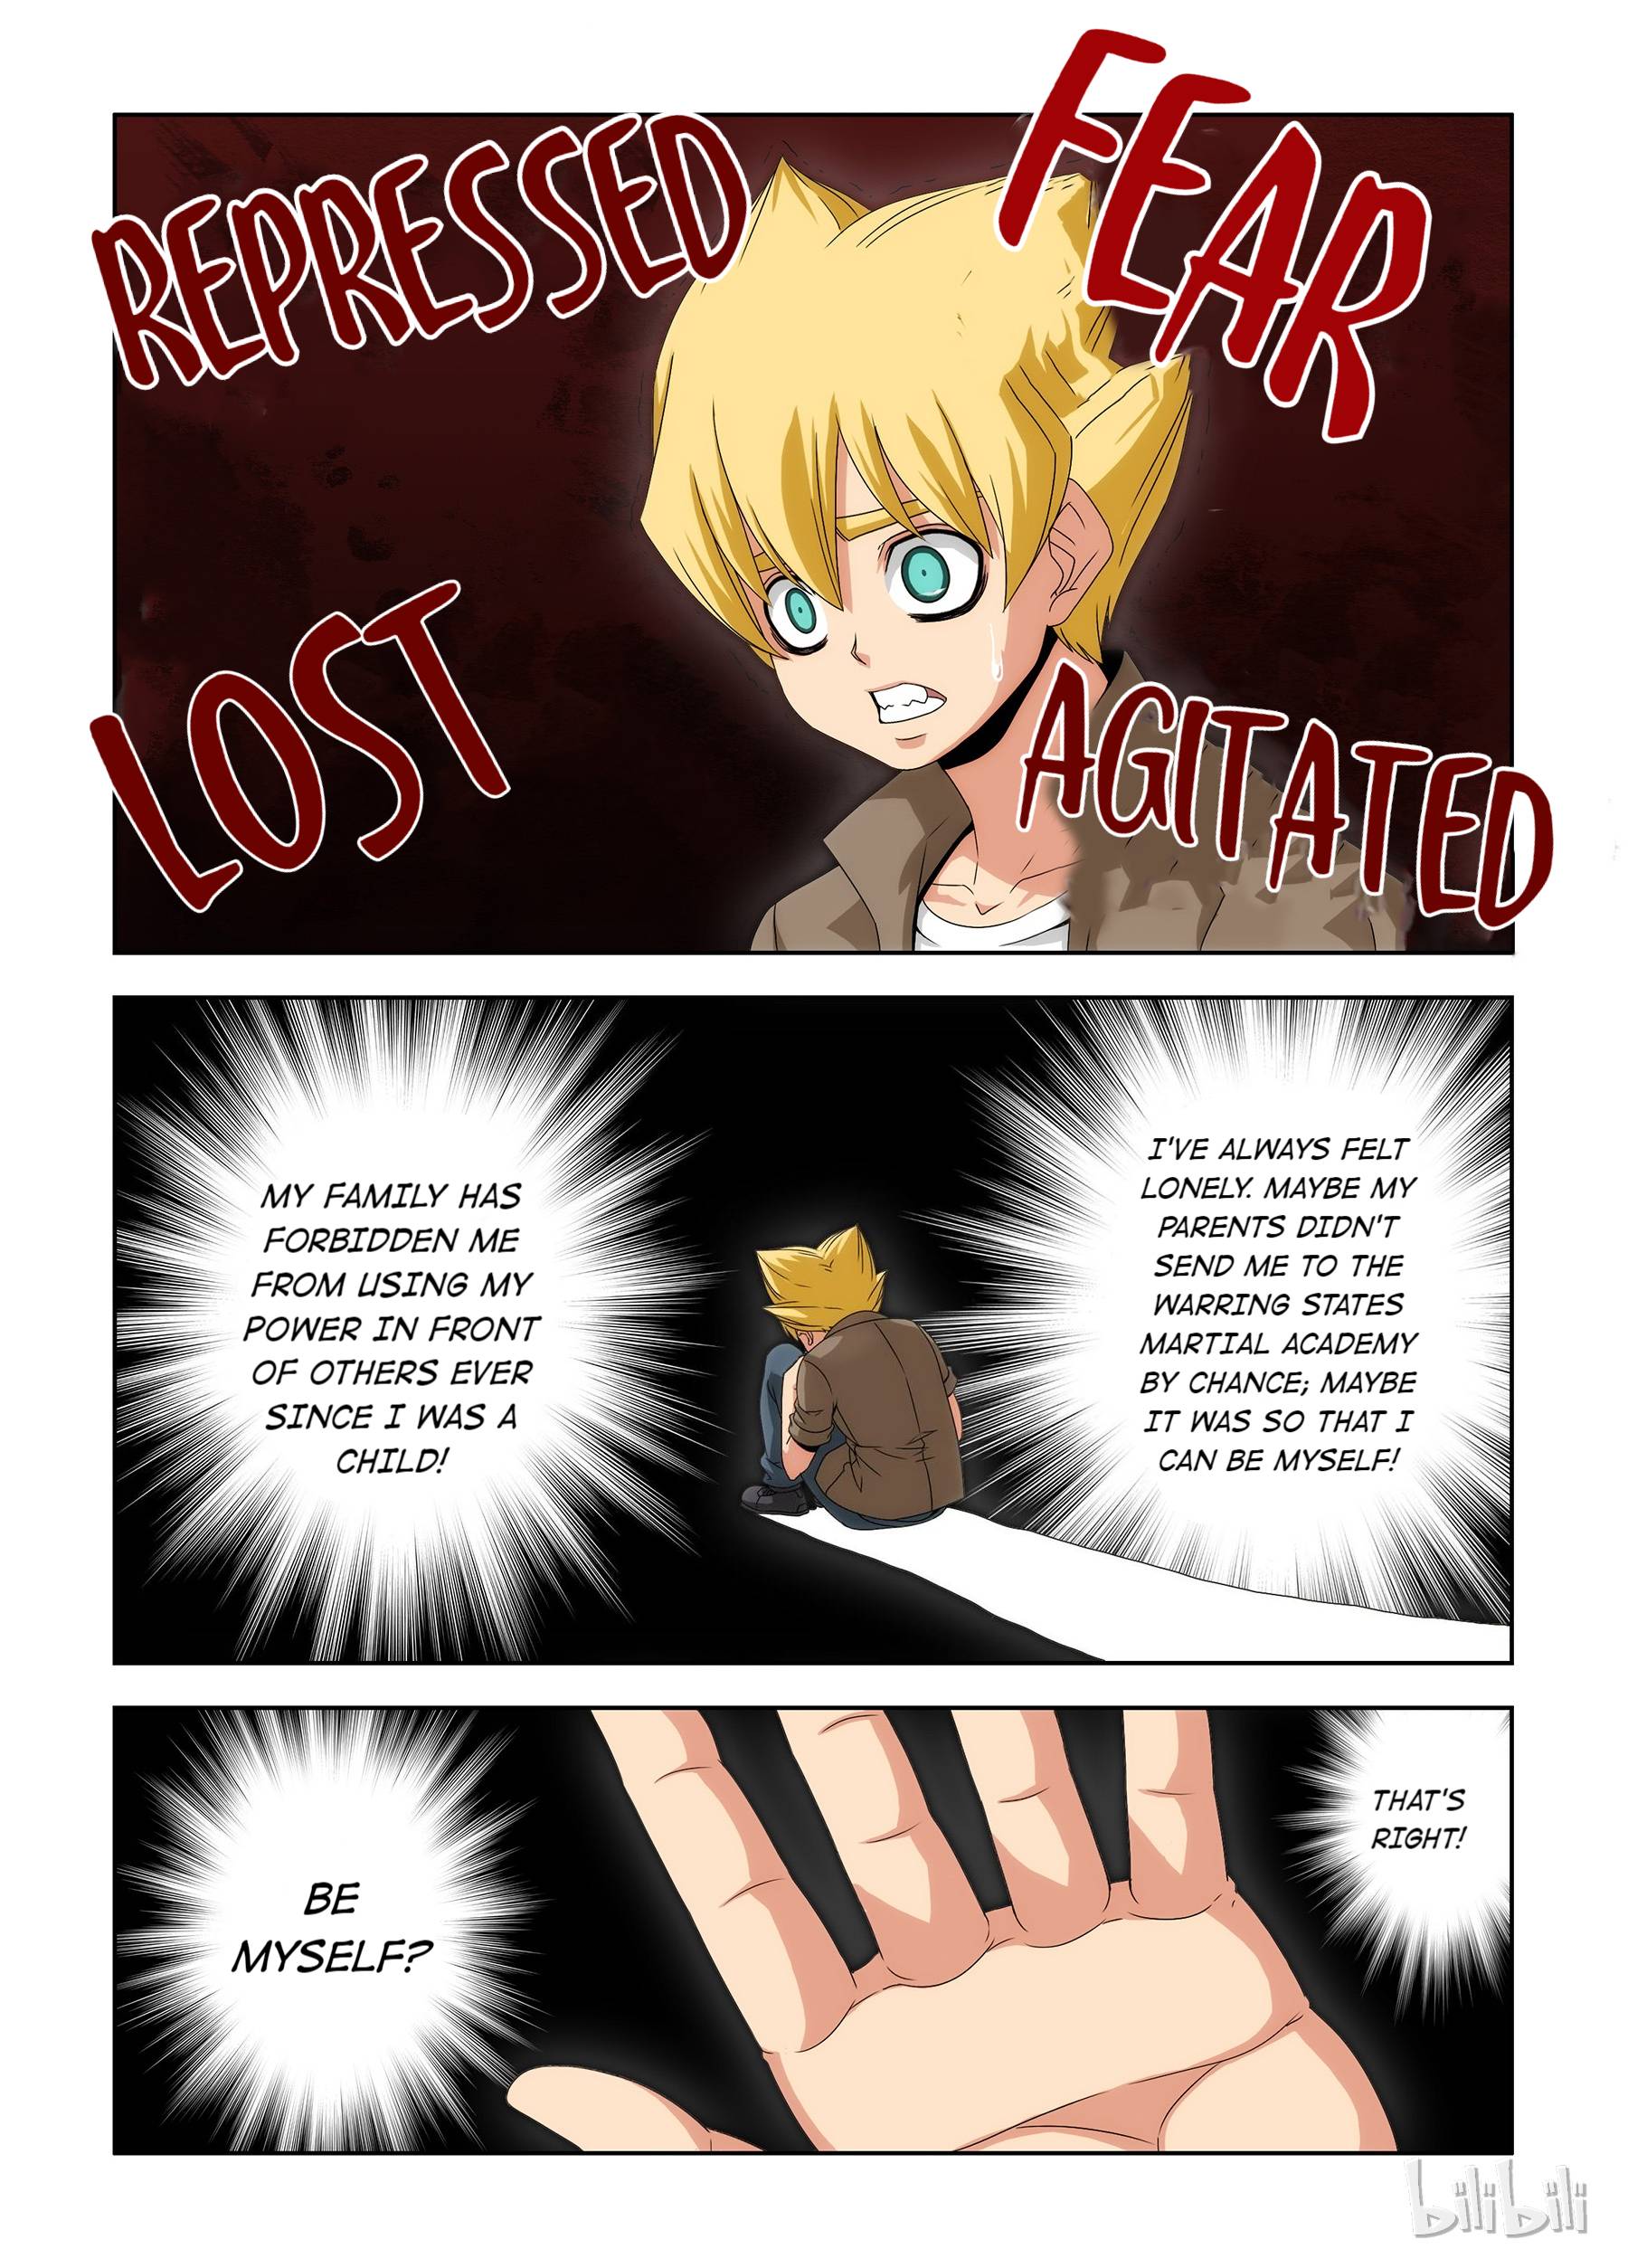 Warring States Martial Academy Chapter 36 - Page 6